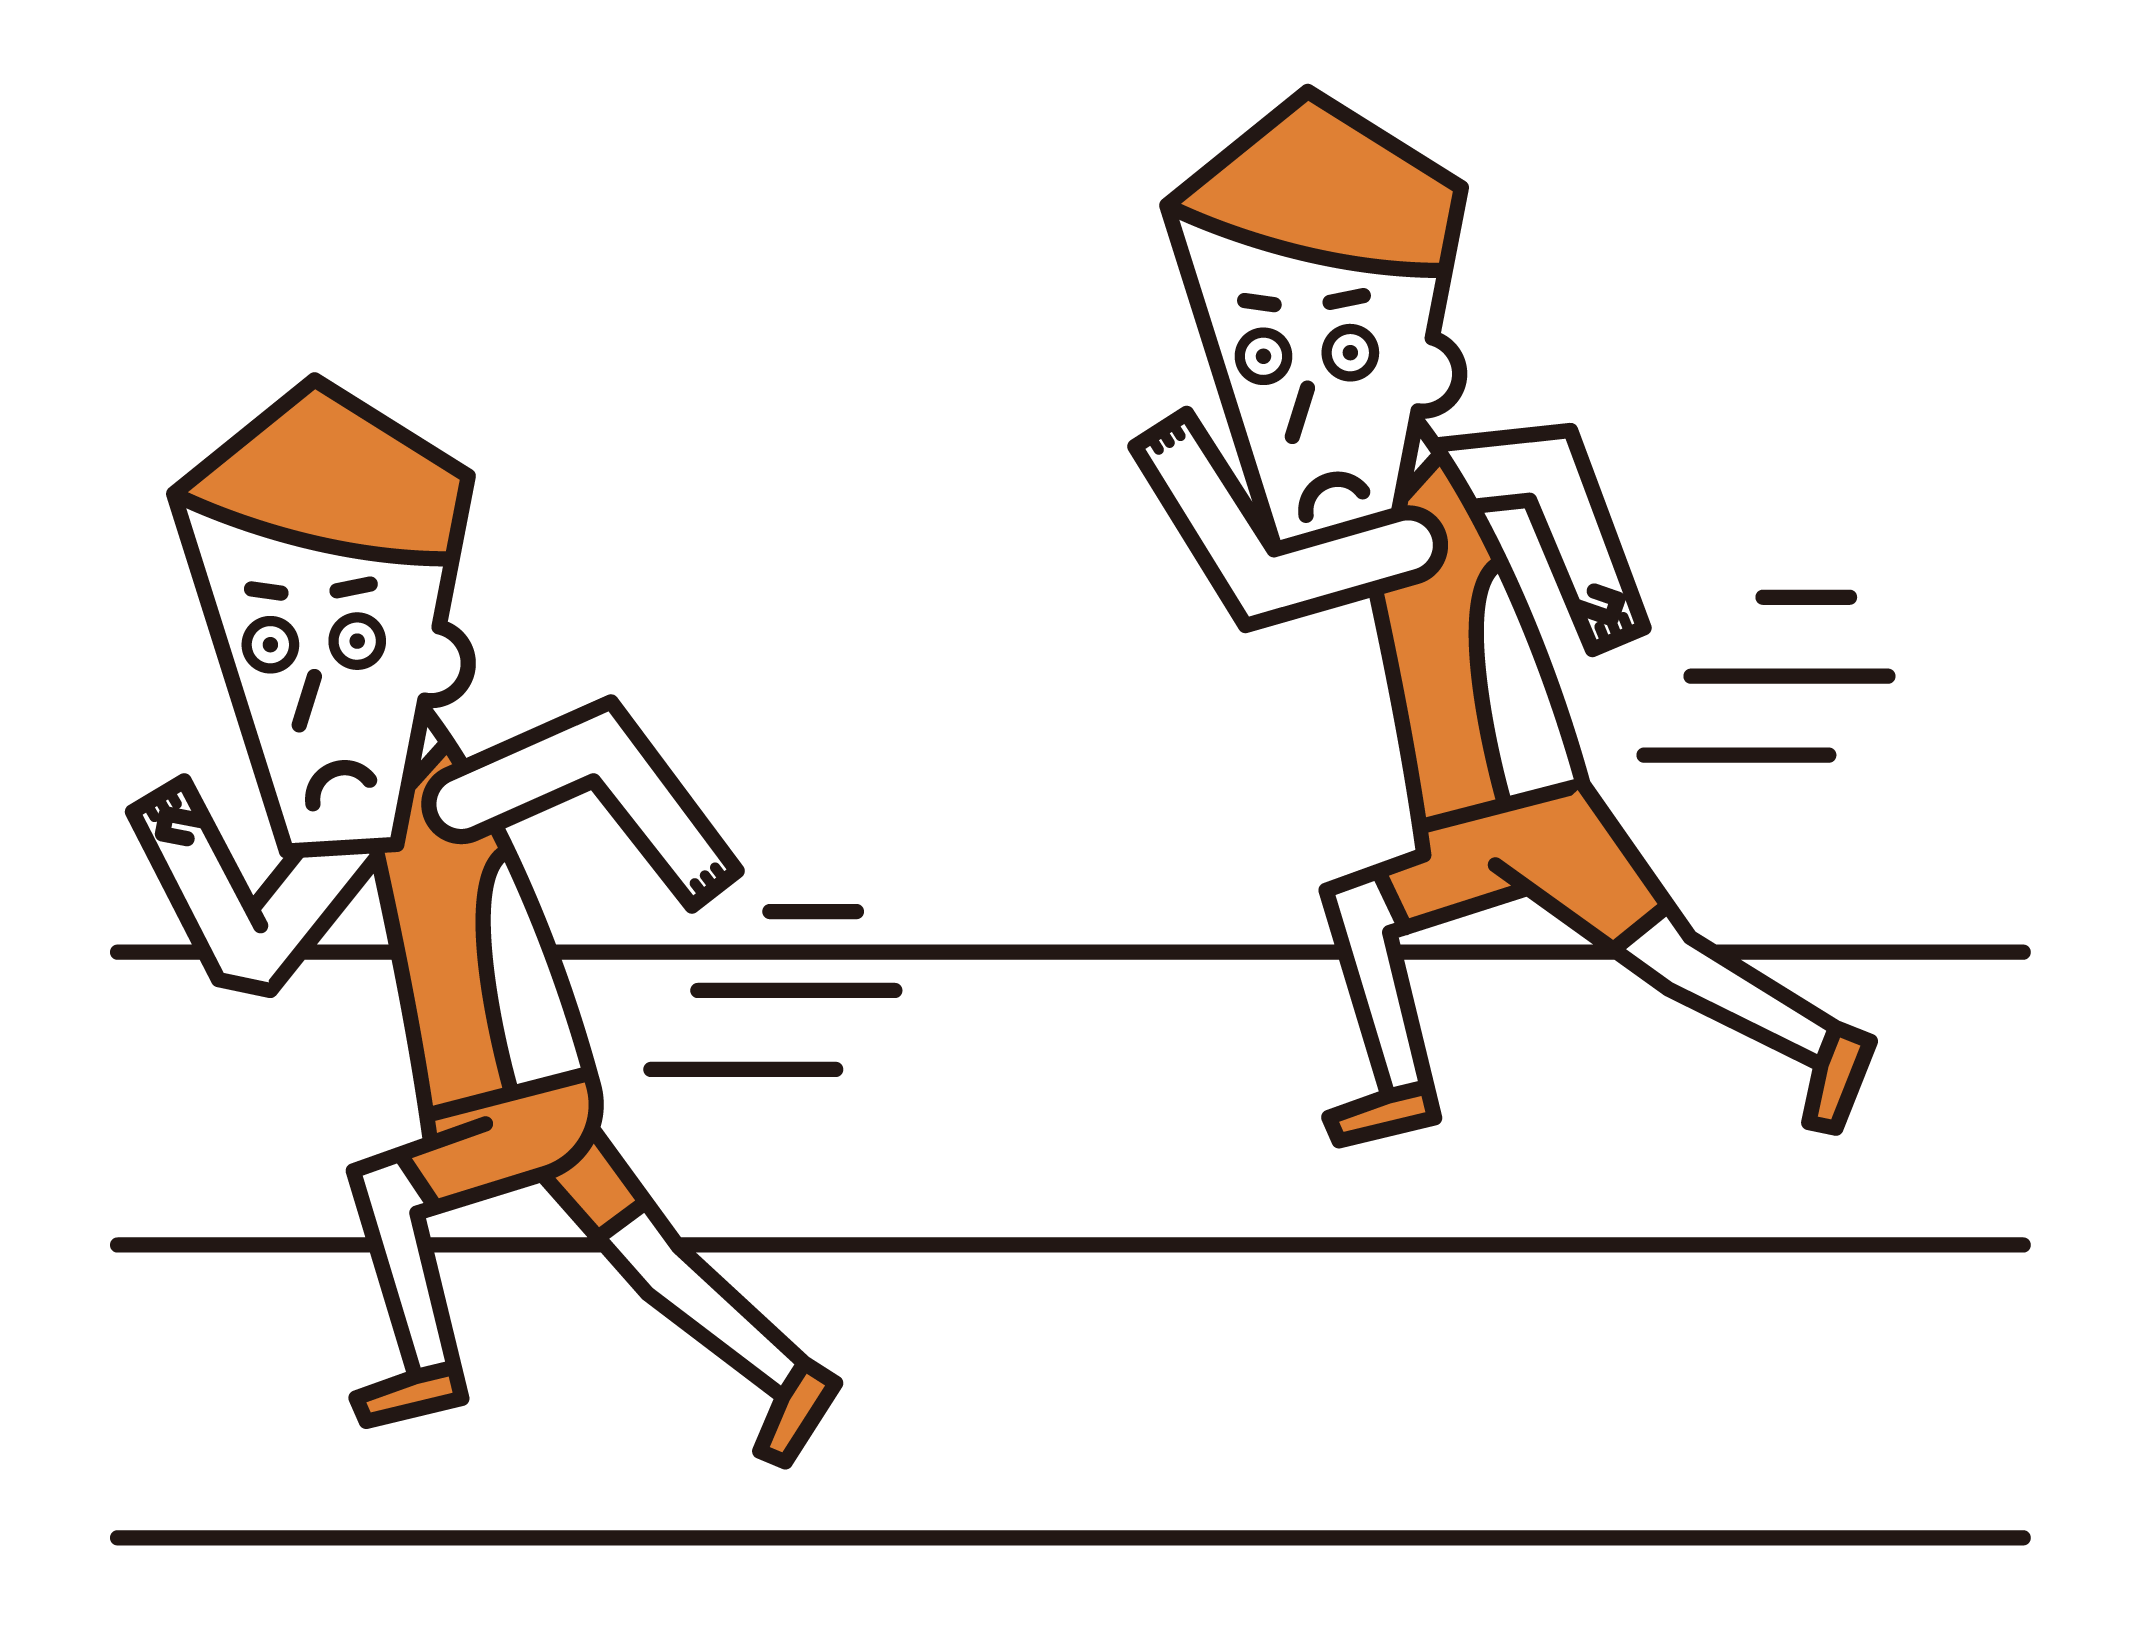 Illustration of athletes (male) competing in a sprint